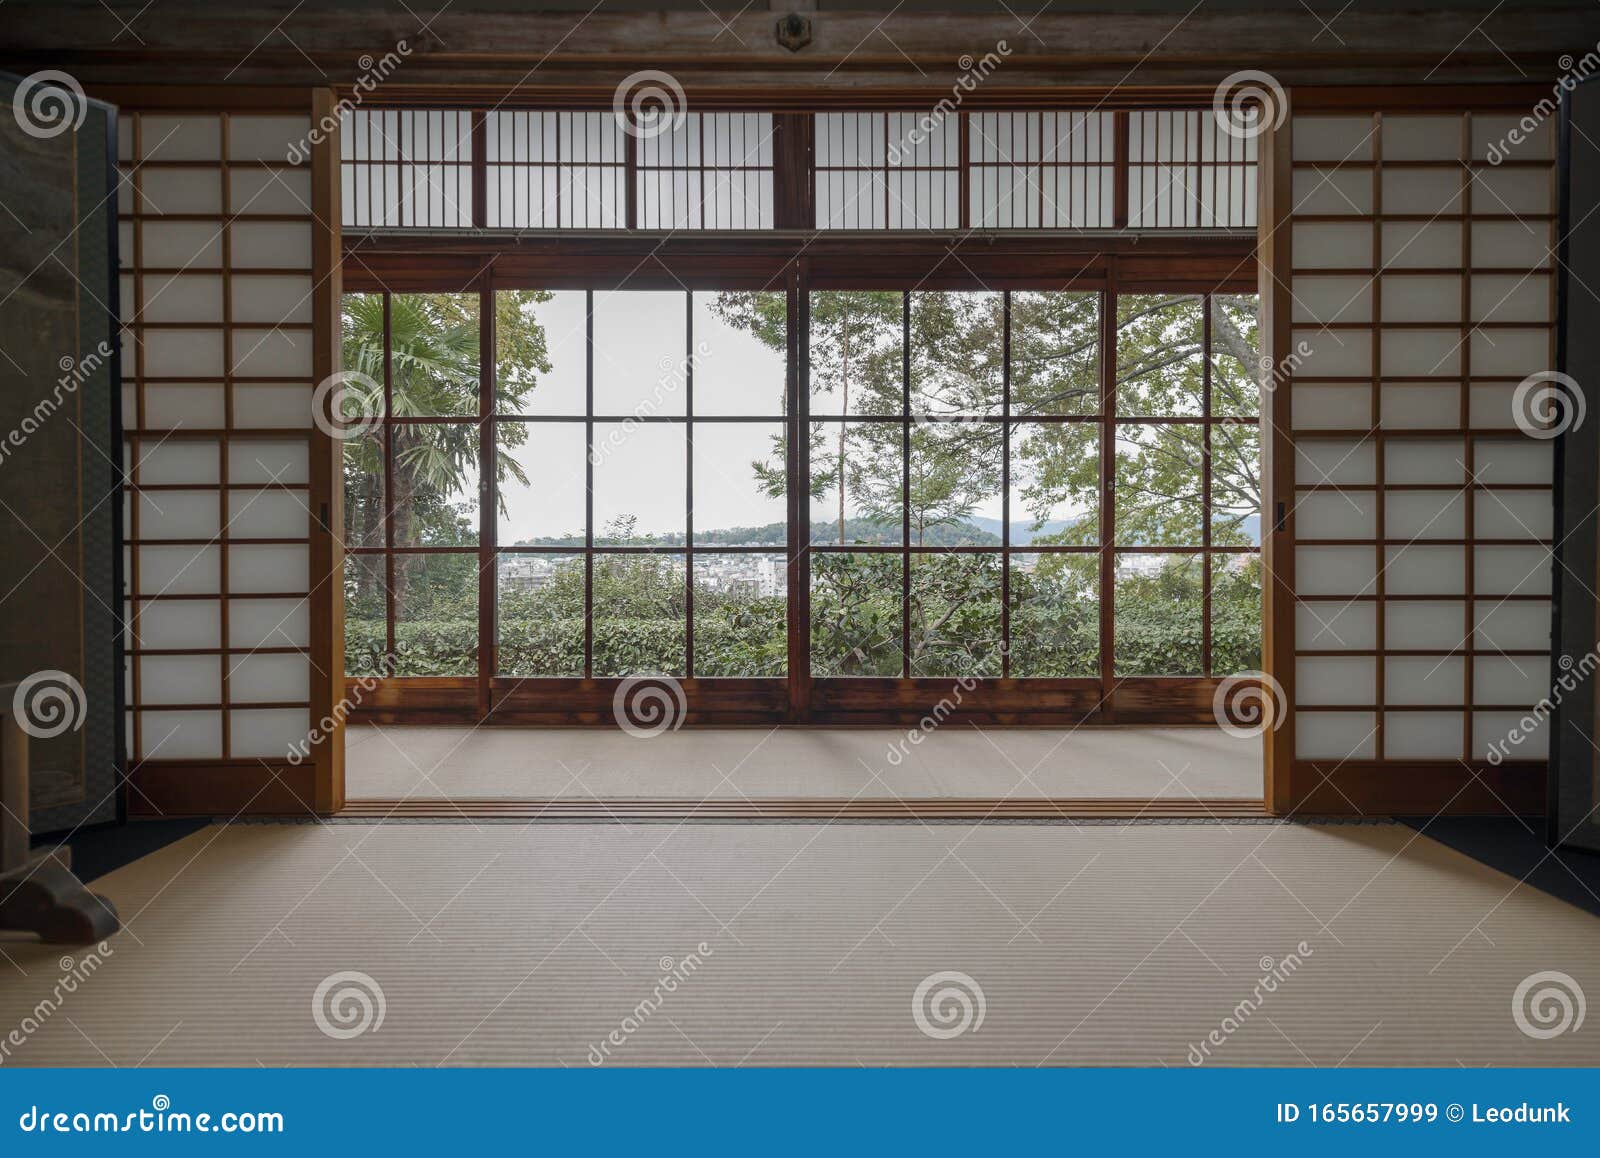 corridor of japanese traditional interior with shoji dividers in honen-in temple, kyoto, japan